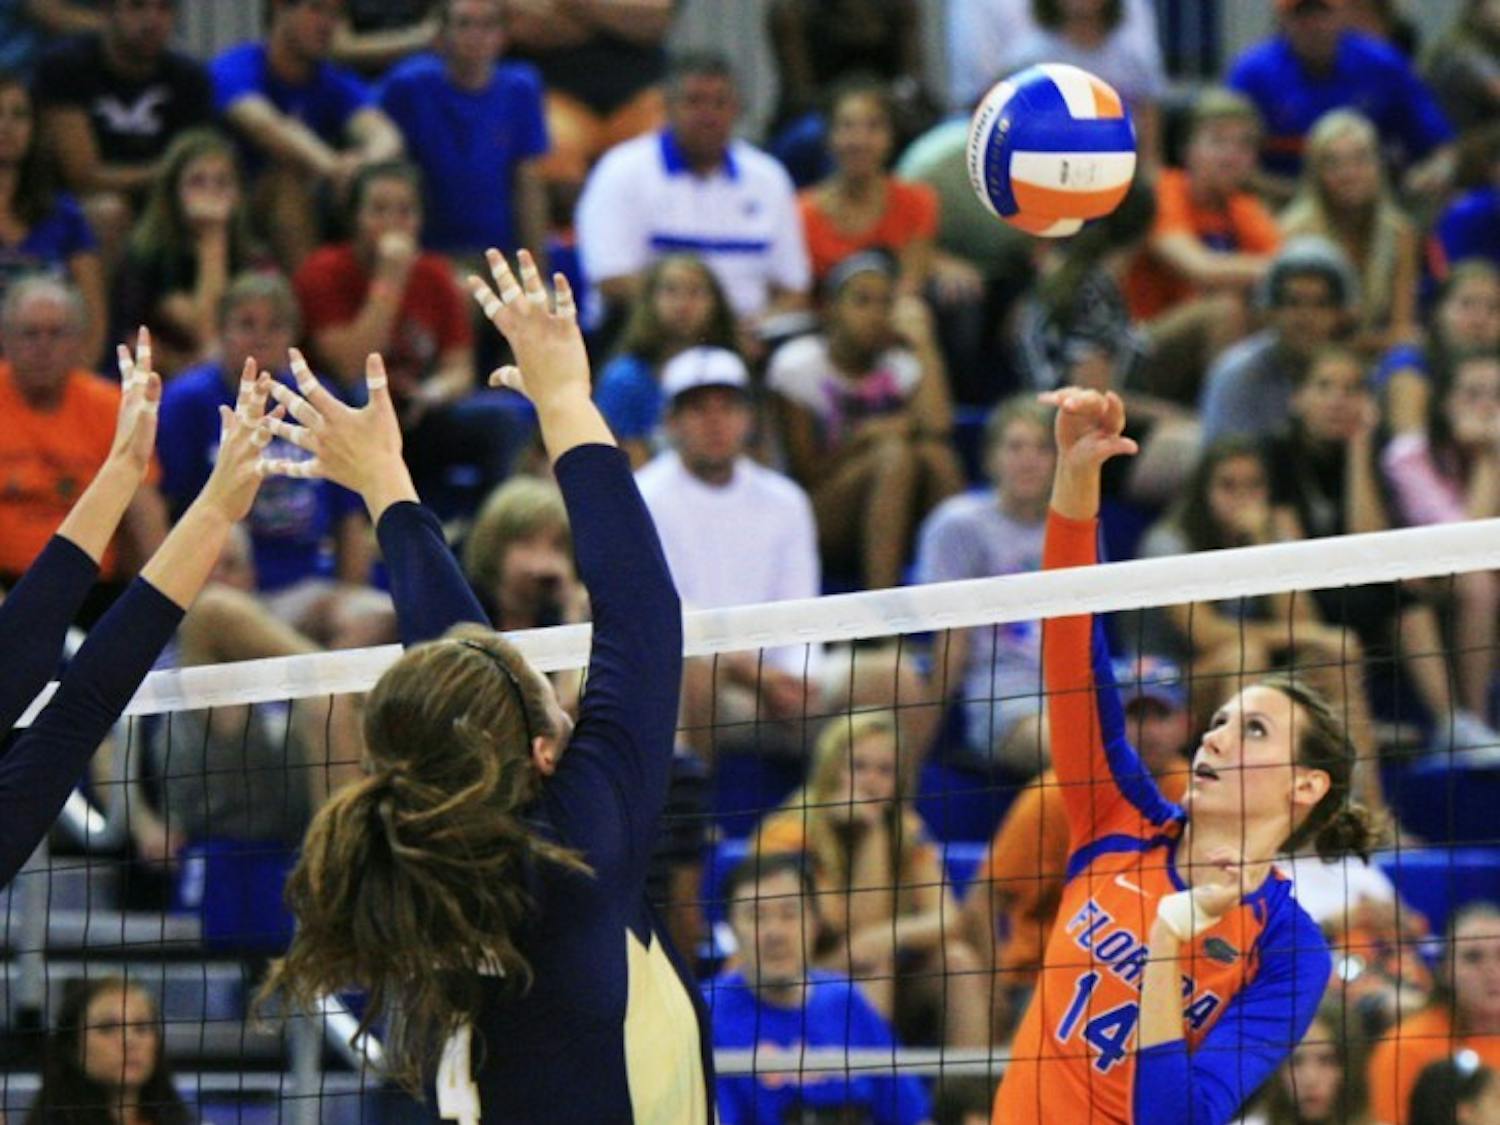 Middle blocker Betsy Smith (14) spikes the ball against Georgia Tech in a 3-1 victory on Sept. 8. The senior led the Gators with a season-high 11 blocks in Florida's sweep of Arkansas on Friday night.